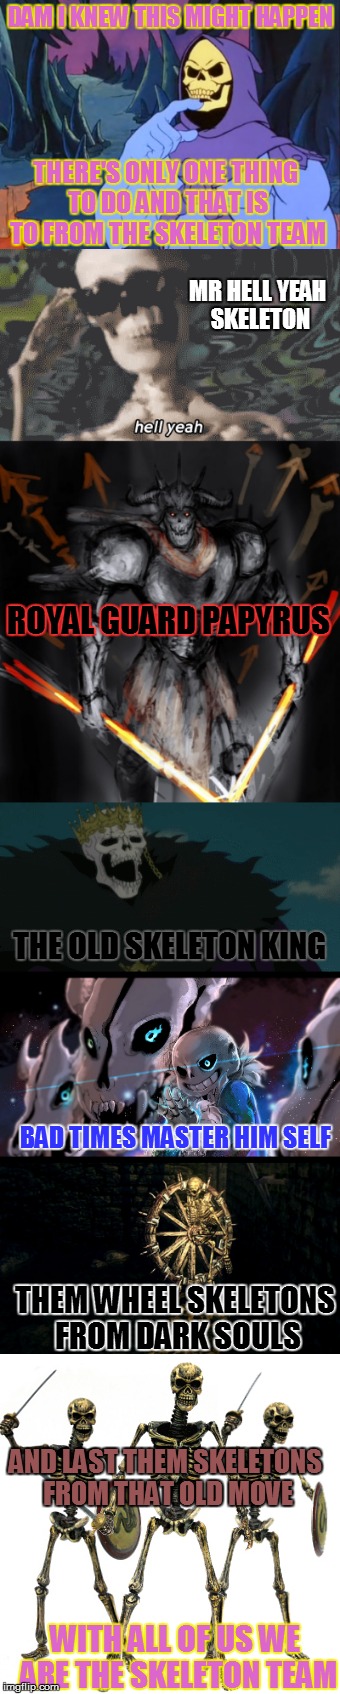 DAM I KNEW THIS MIGHT HAPPEN THERE'S ONLY ONE THING TO DO AND THAT IS TO FROM THE SKELETON TEAM MR HELL YEAH SKELETON ROYAL GUARD PAPYRUS TH | made w/ Imgflip meme maker